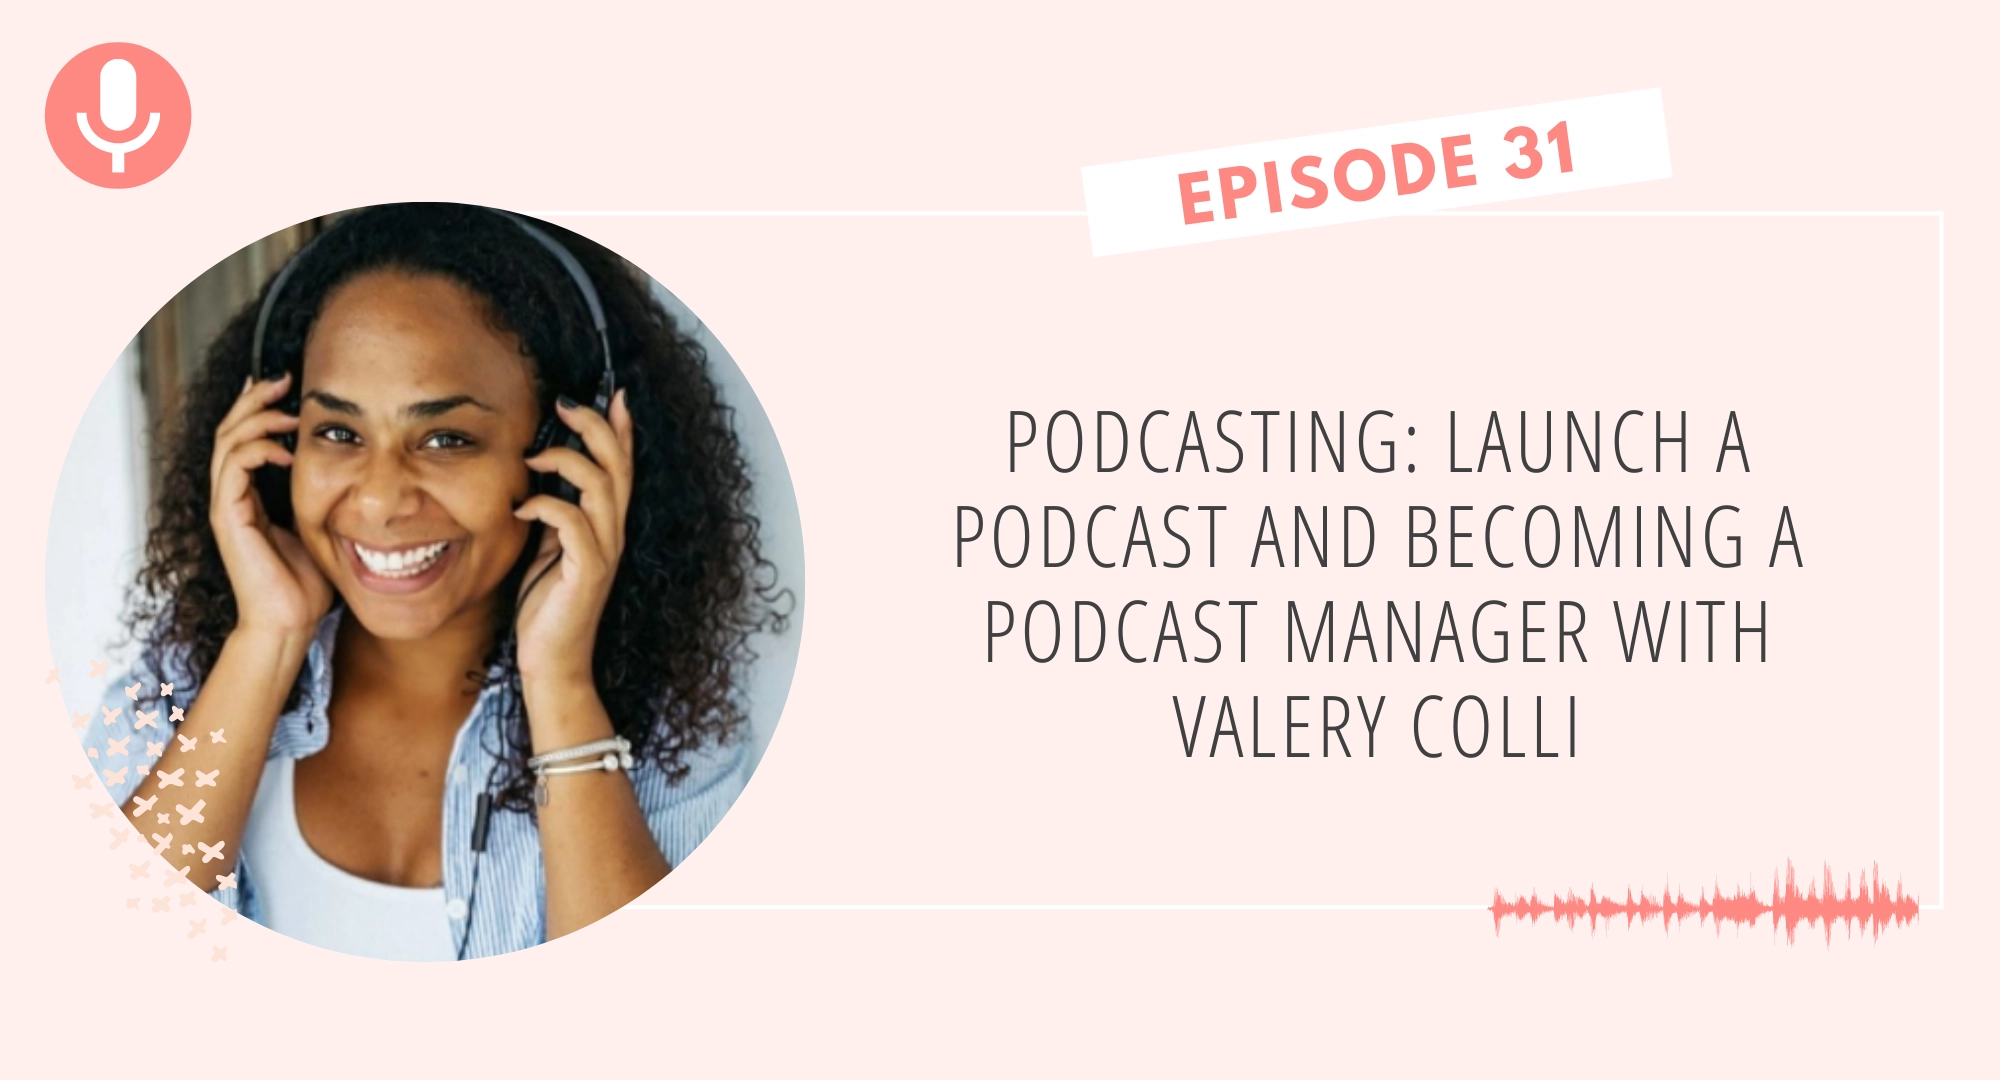 Launch a Podcast and Becoming a Podcast Manager